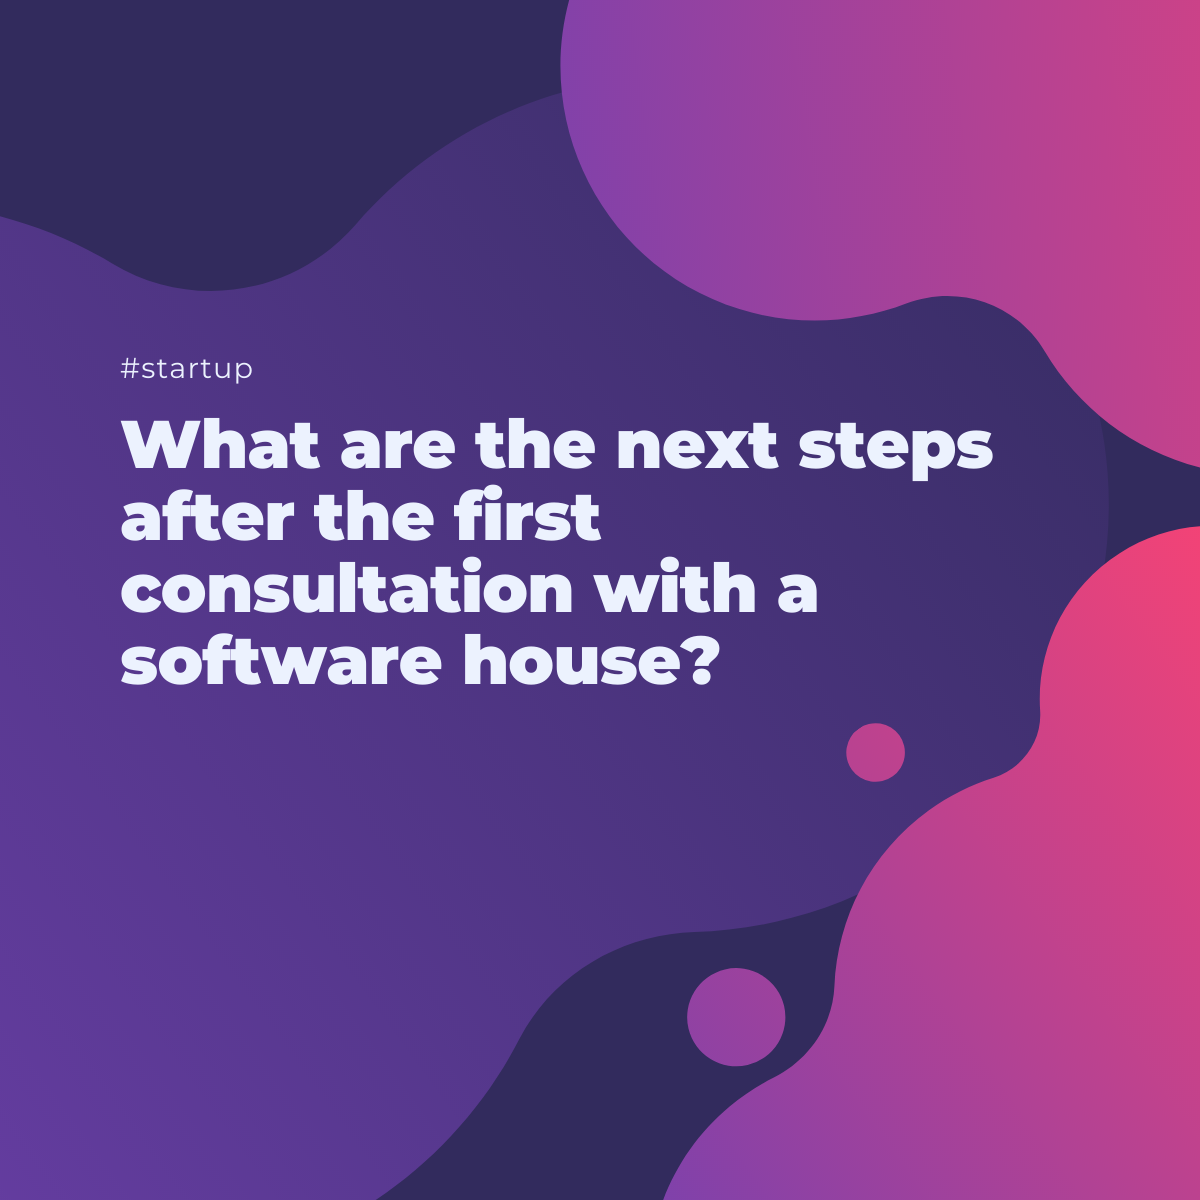 What are the next steps after the first consultation with a software house?